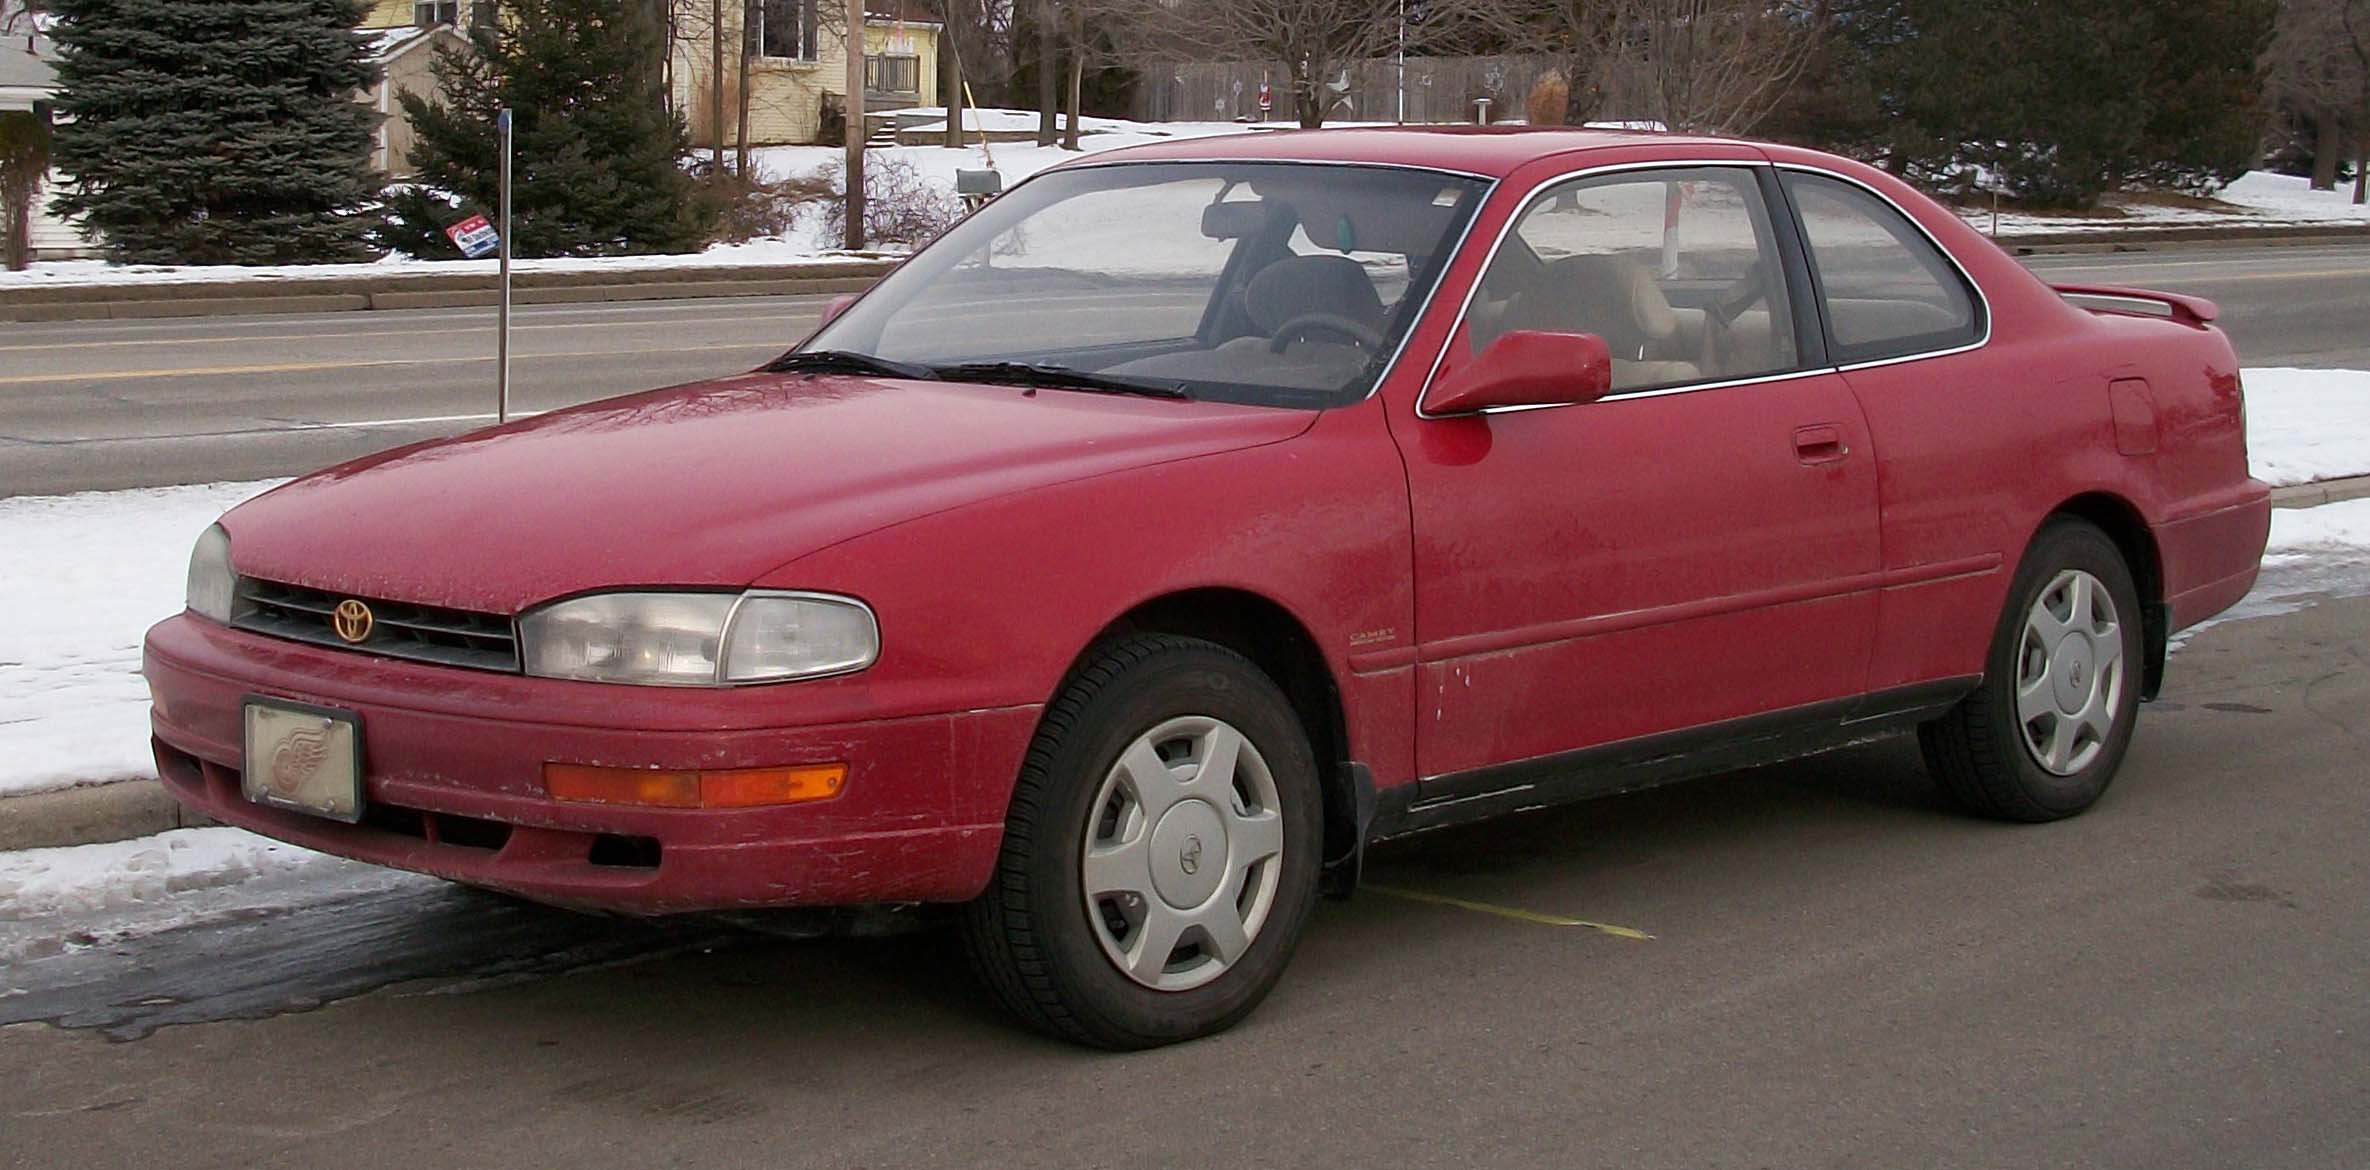 94_Camry_coupe.jpg